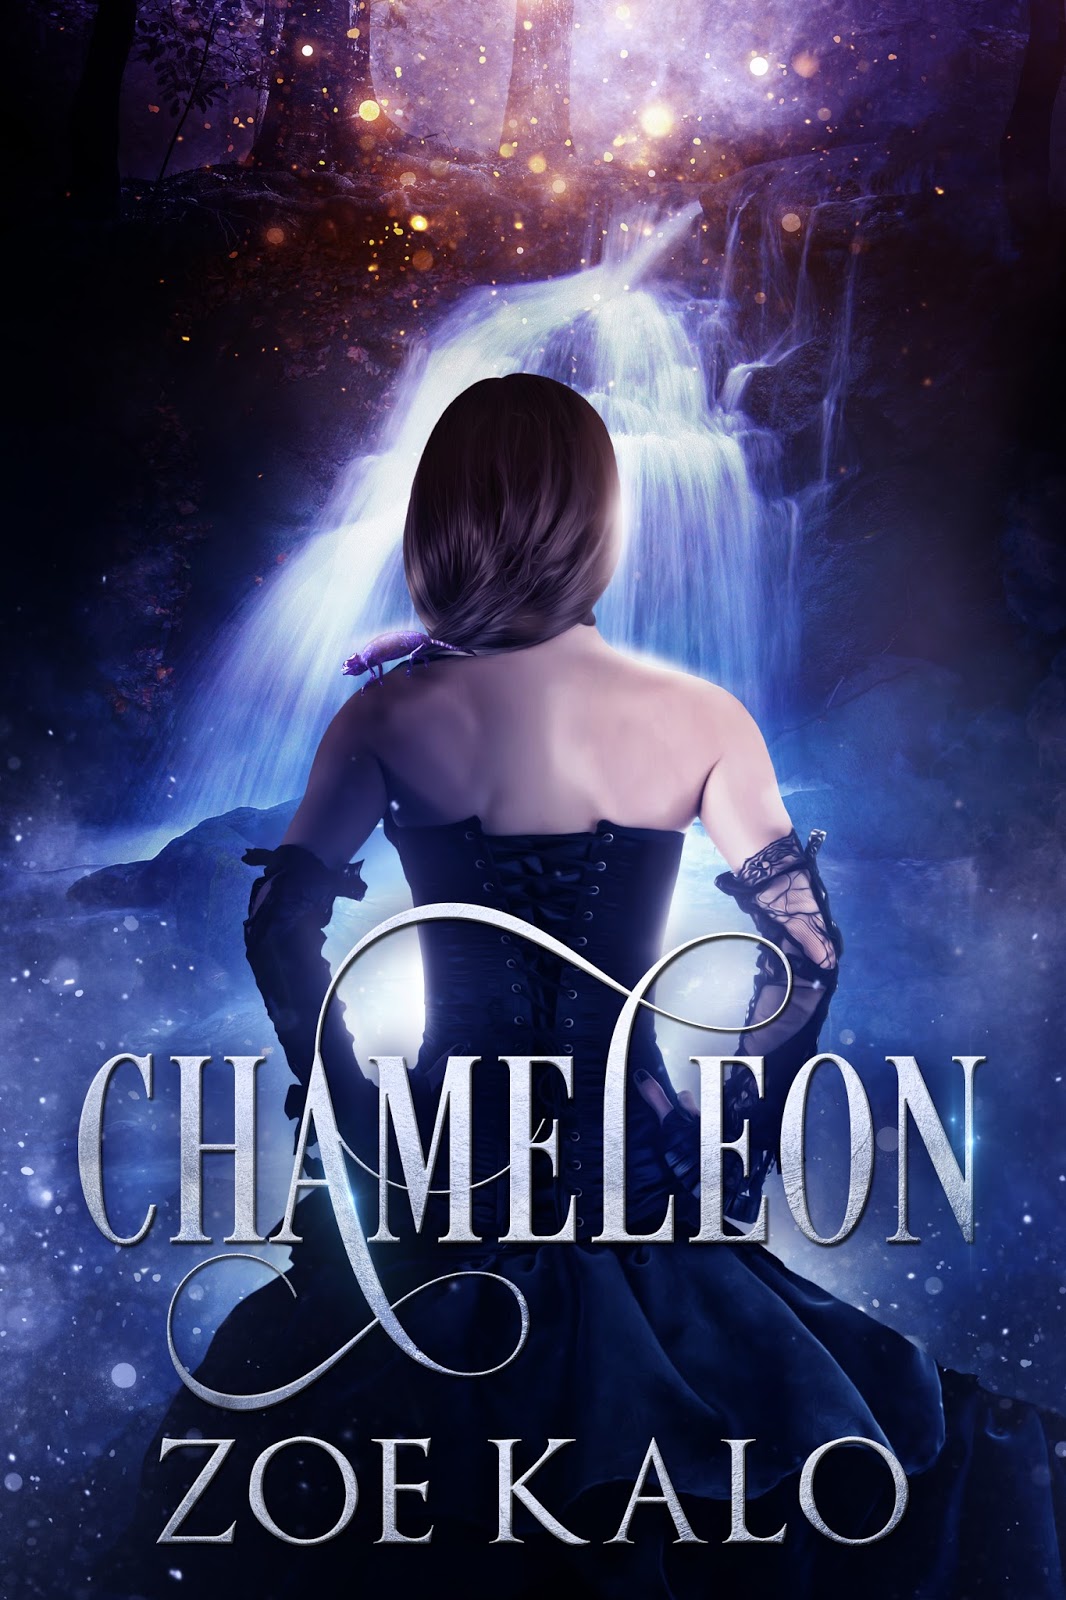 Book Blitz Excerpt And Giveaway For Chameleon By Zoe Kalo